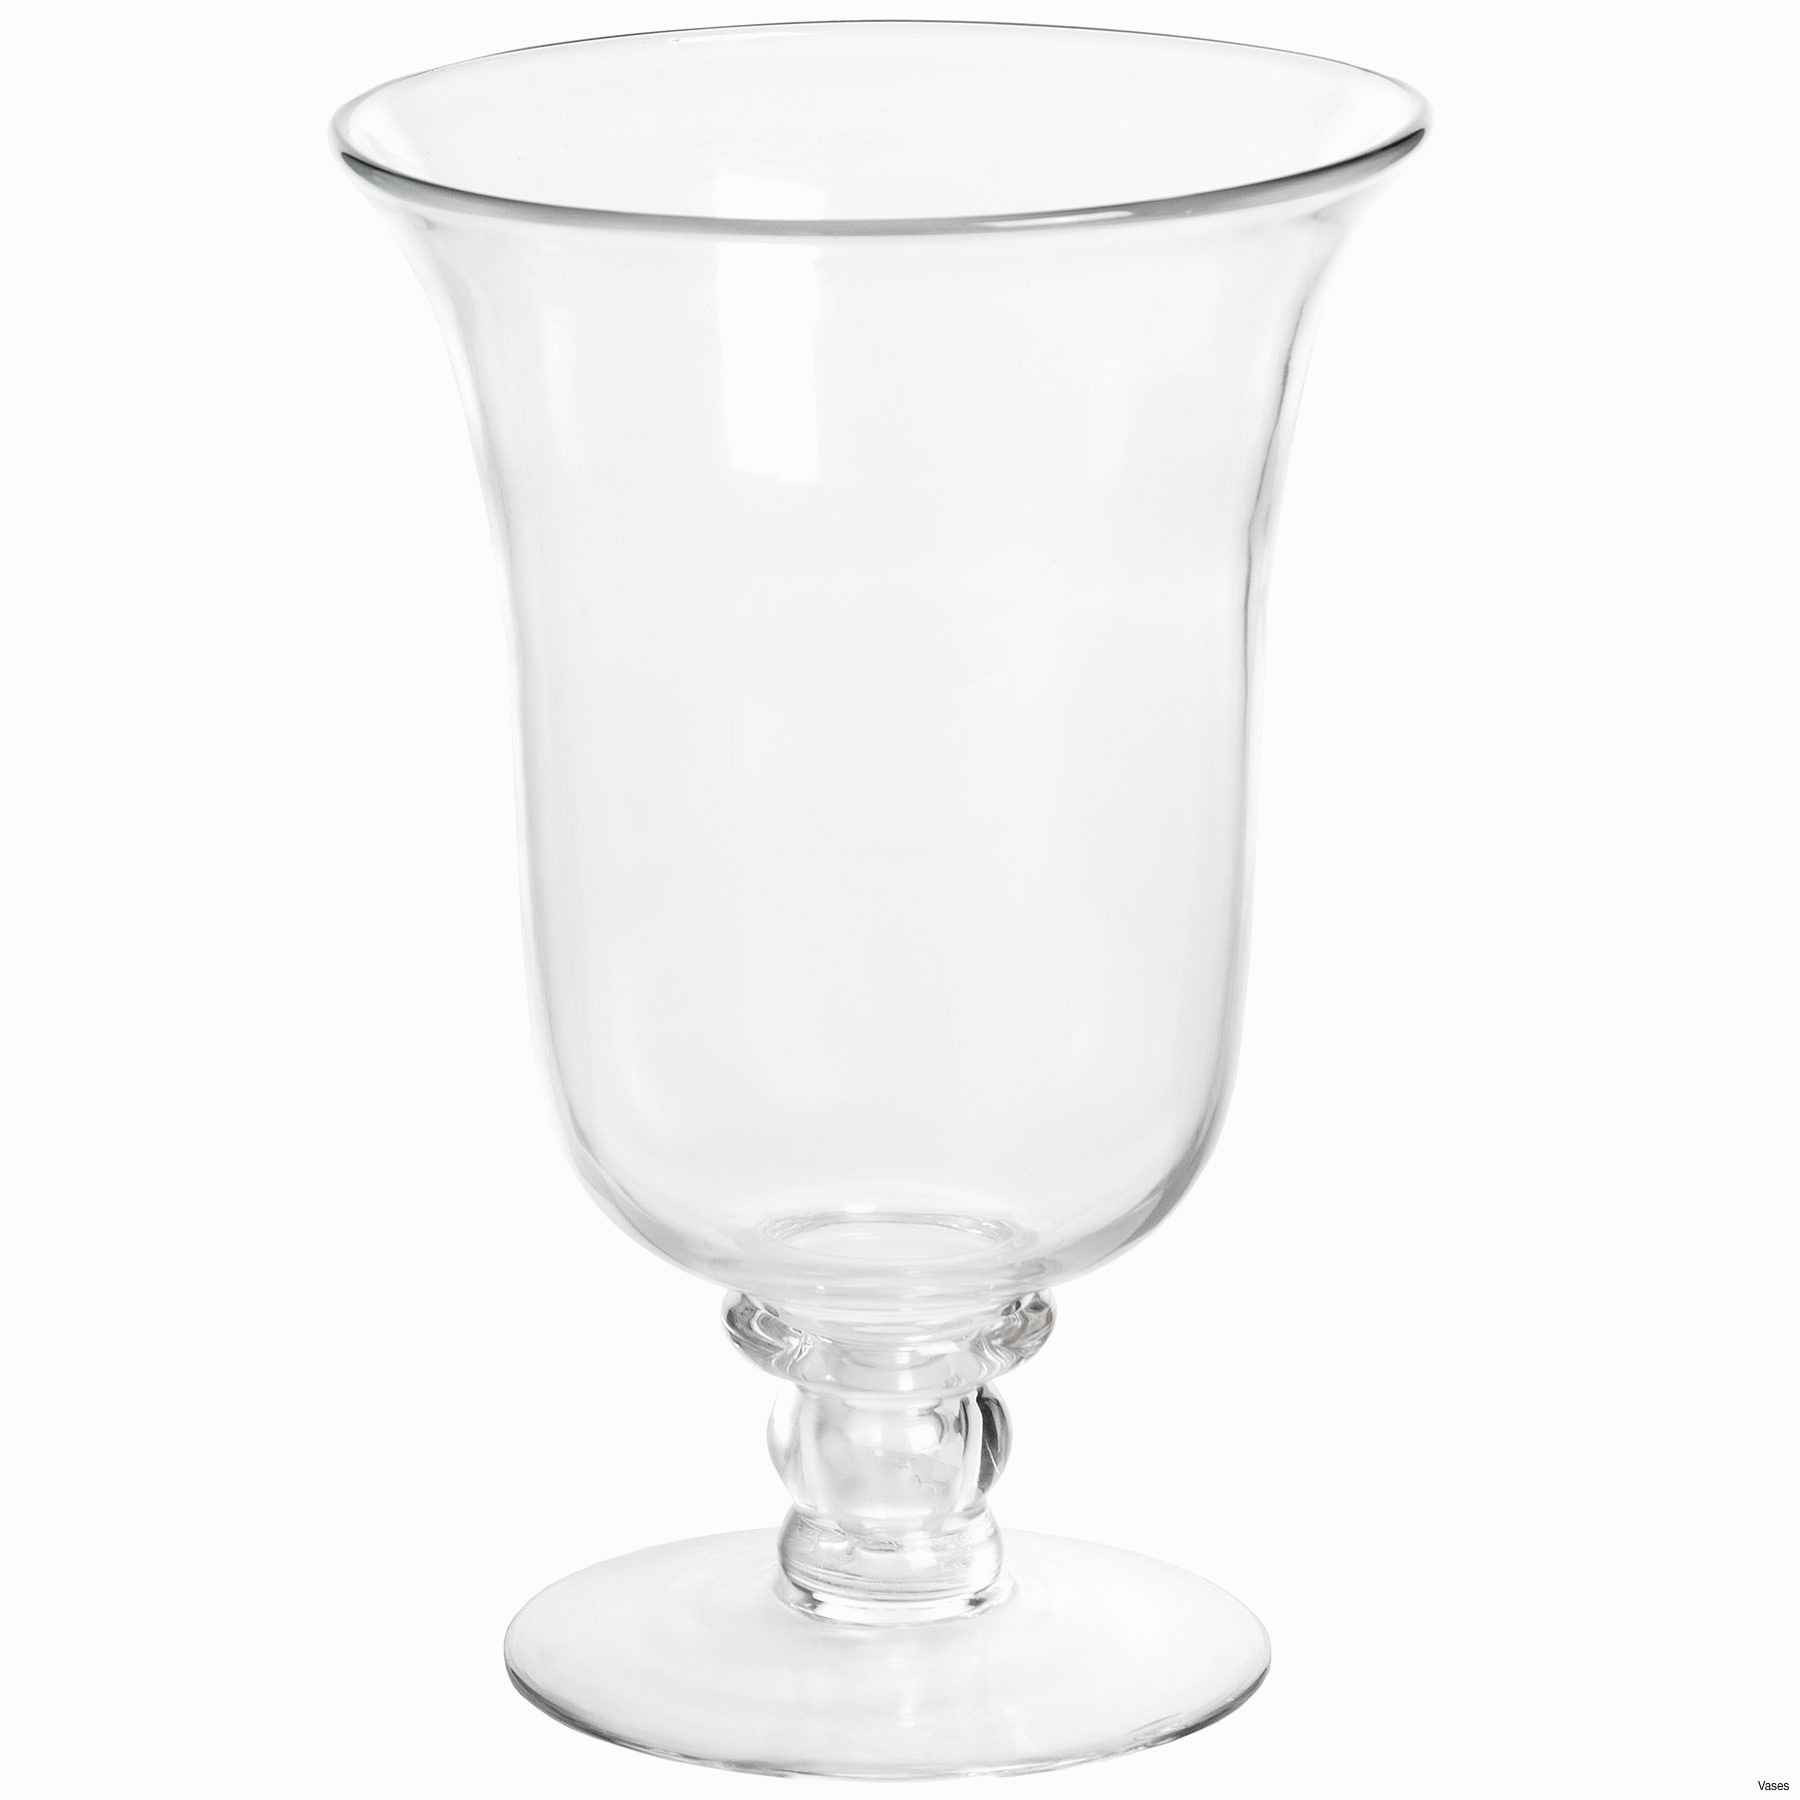 12 Stylish Unique Clear Glass Vases 2024 free download unique clear glass vases of candle stands wholesale lovely faux crystal candle holders alive in candle stands wholesale lovely faux crystal candle holders alive vases gold tall jpgi 0d cheap